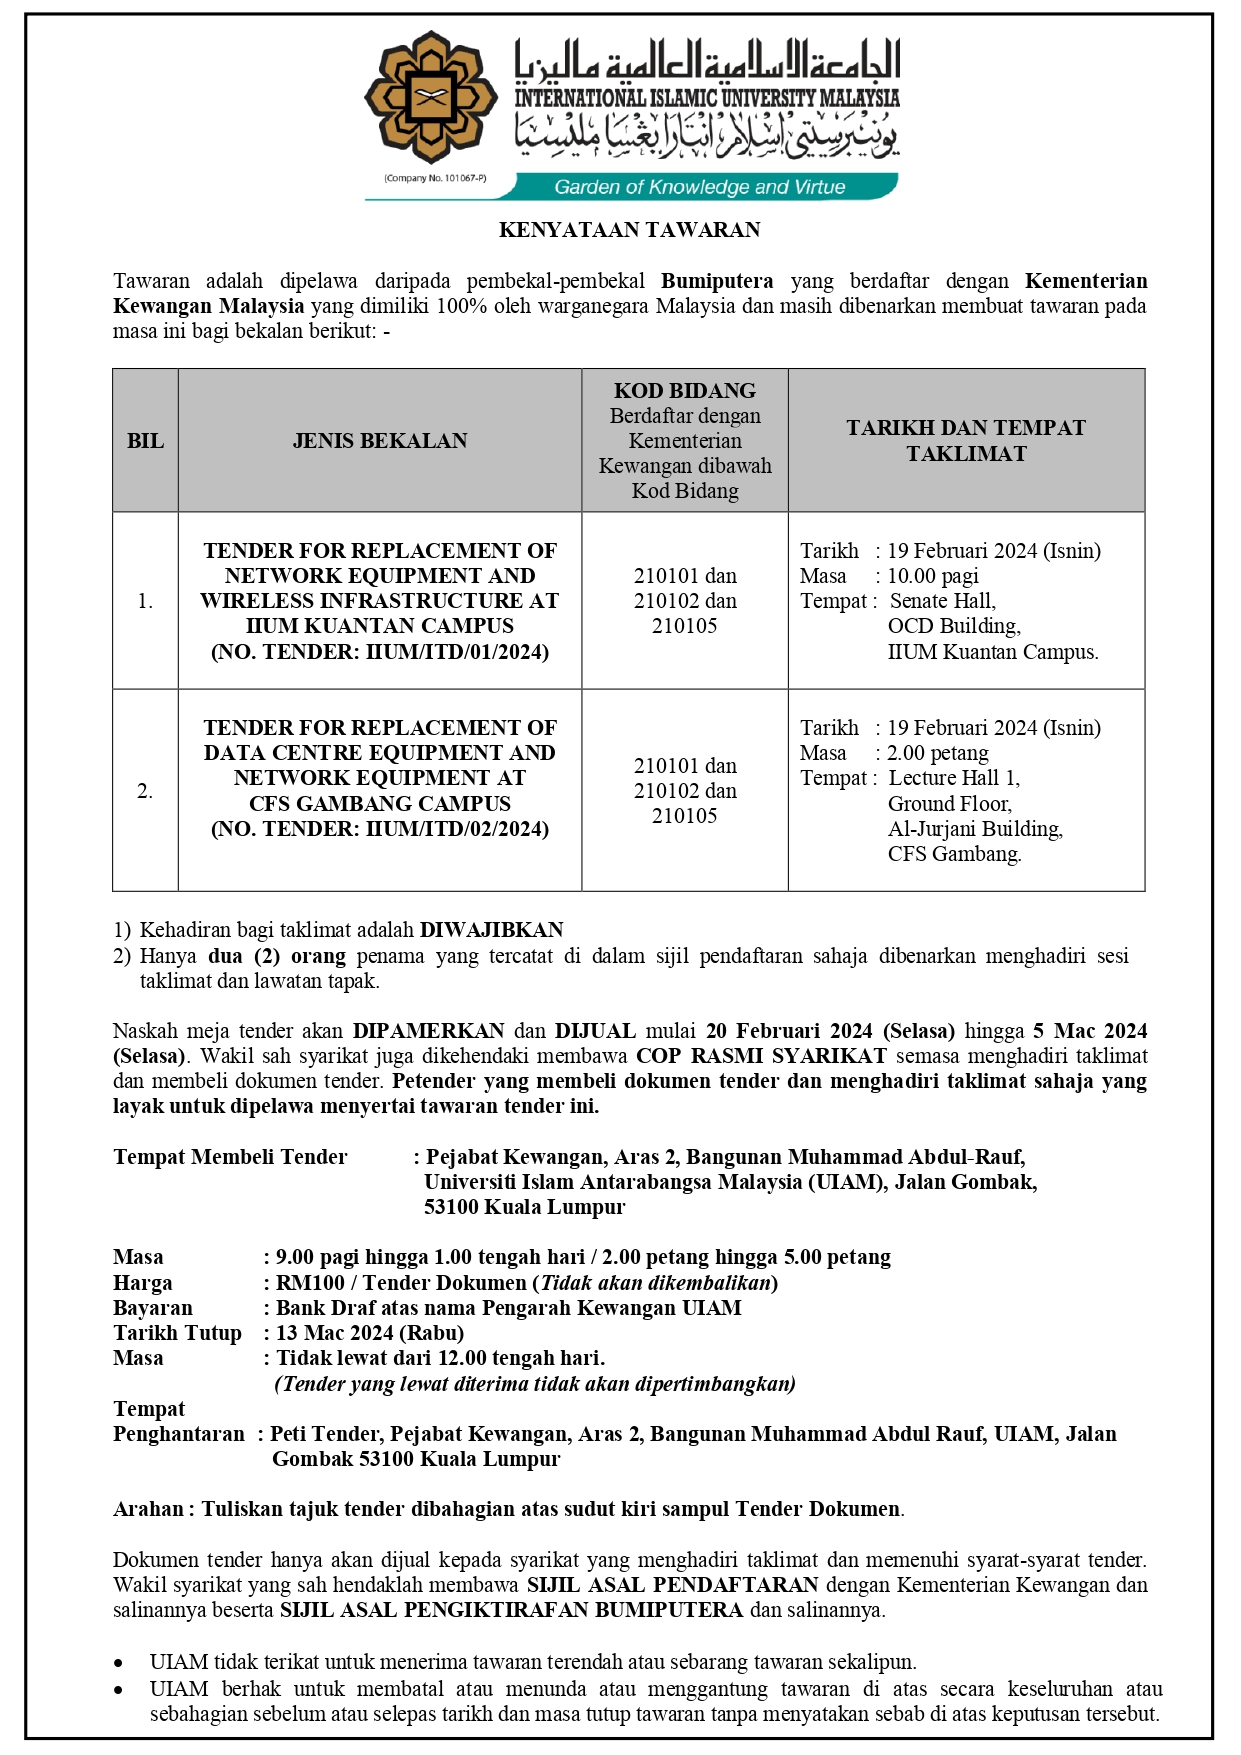 TENDER FOR REPLACEMENT OF NETWORK EQUIPMENT AND WIRELESS INFRASTRUCTURE AT IIUM KUANTAN CAMPUS’ and ‘TENDER FOR REPLACEMENT OF DATA CENTRE EQUIPMENT AND NETWORK EQUIPMENT AF CFS GAMBANG CAMPUS’for International Islamic University Malaysia